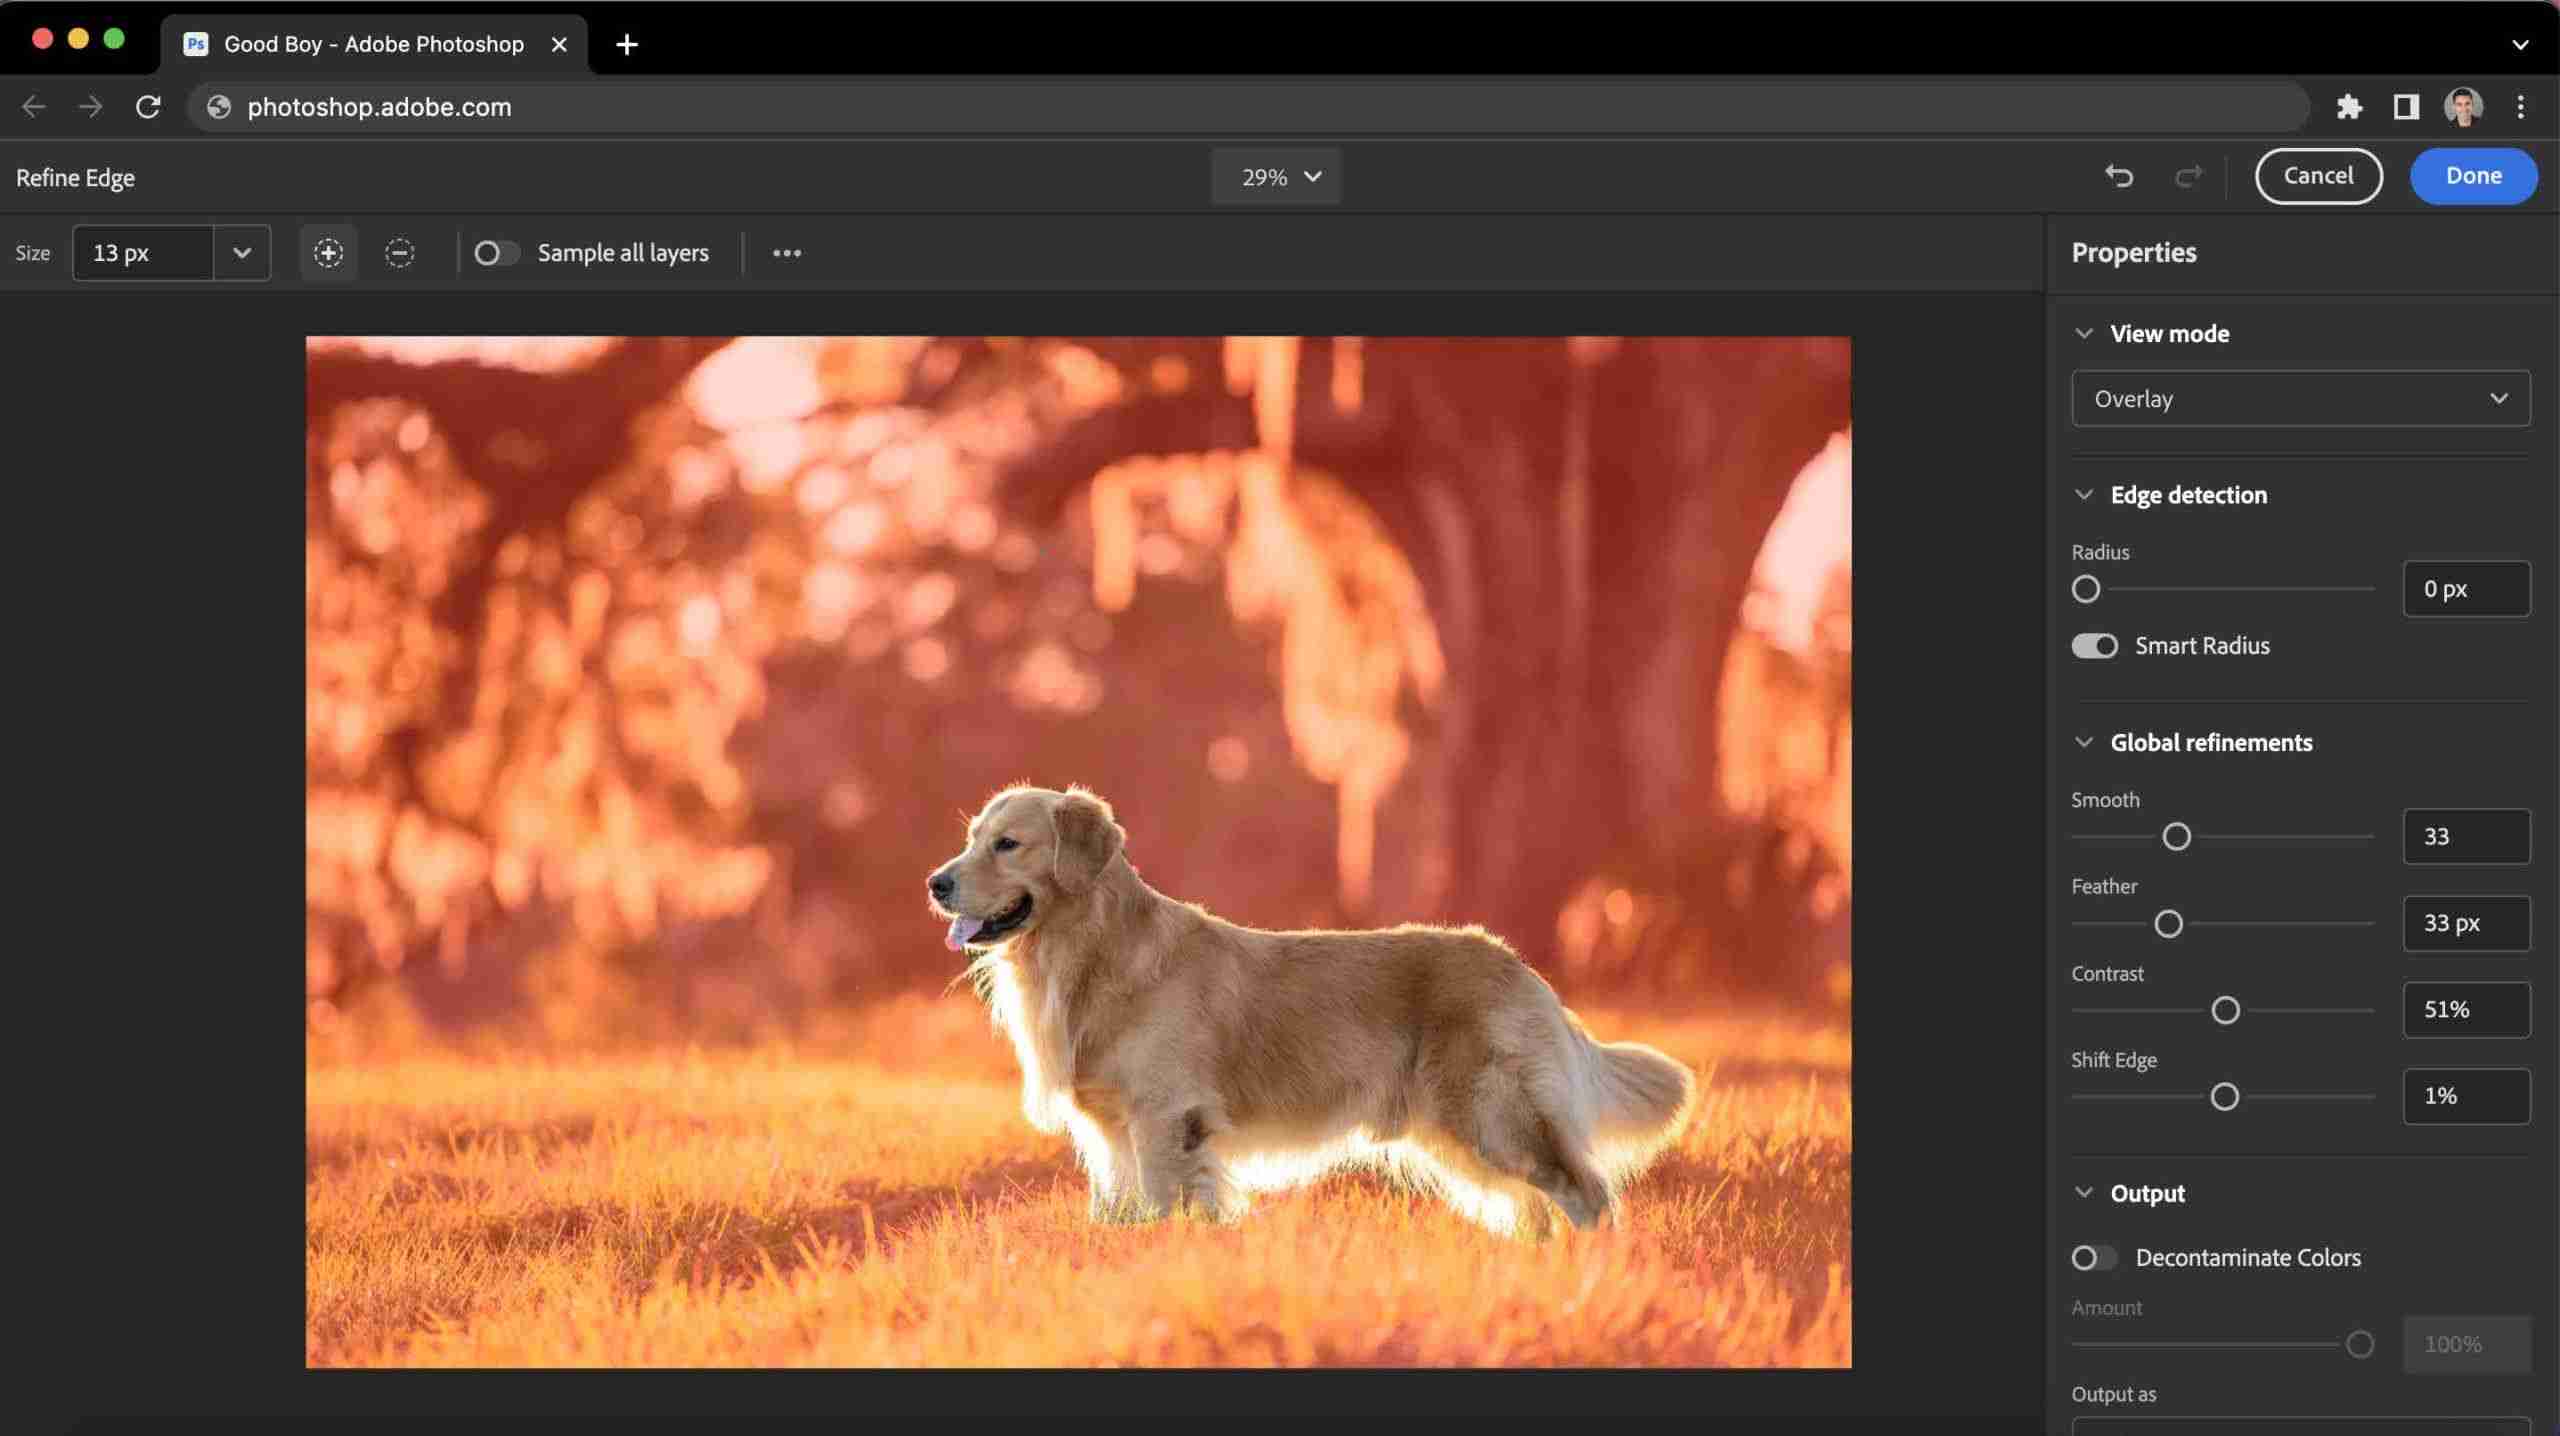 Adobe Photoshop will soon become free on the web